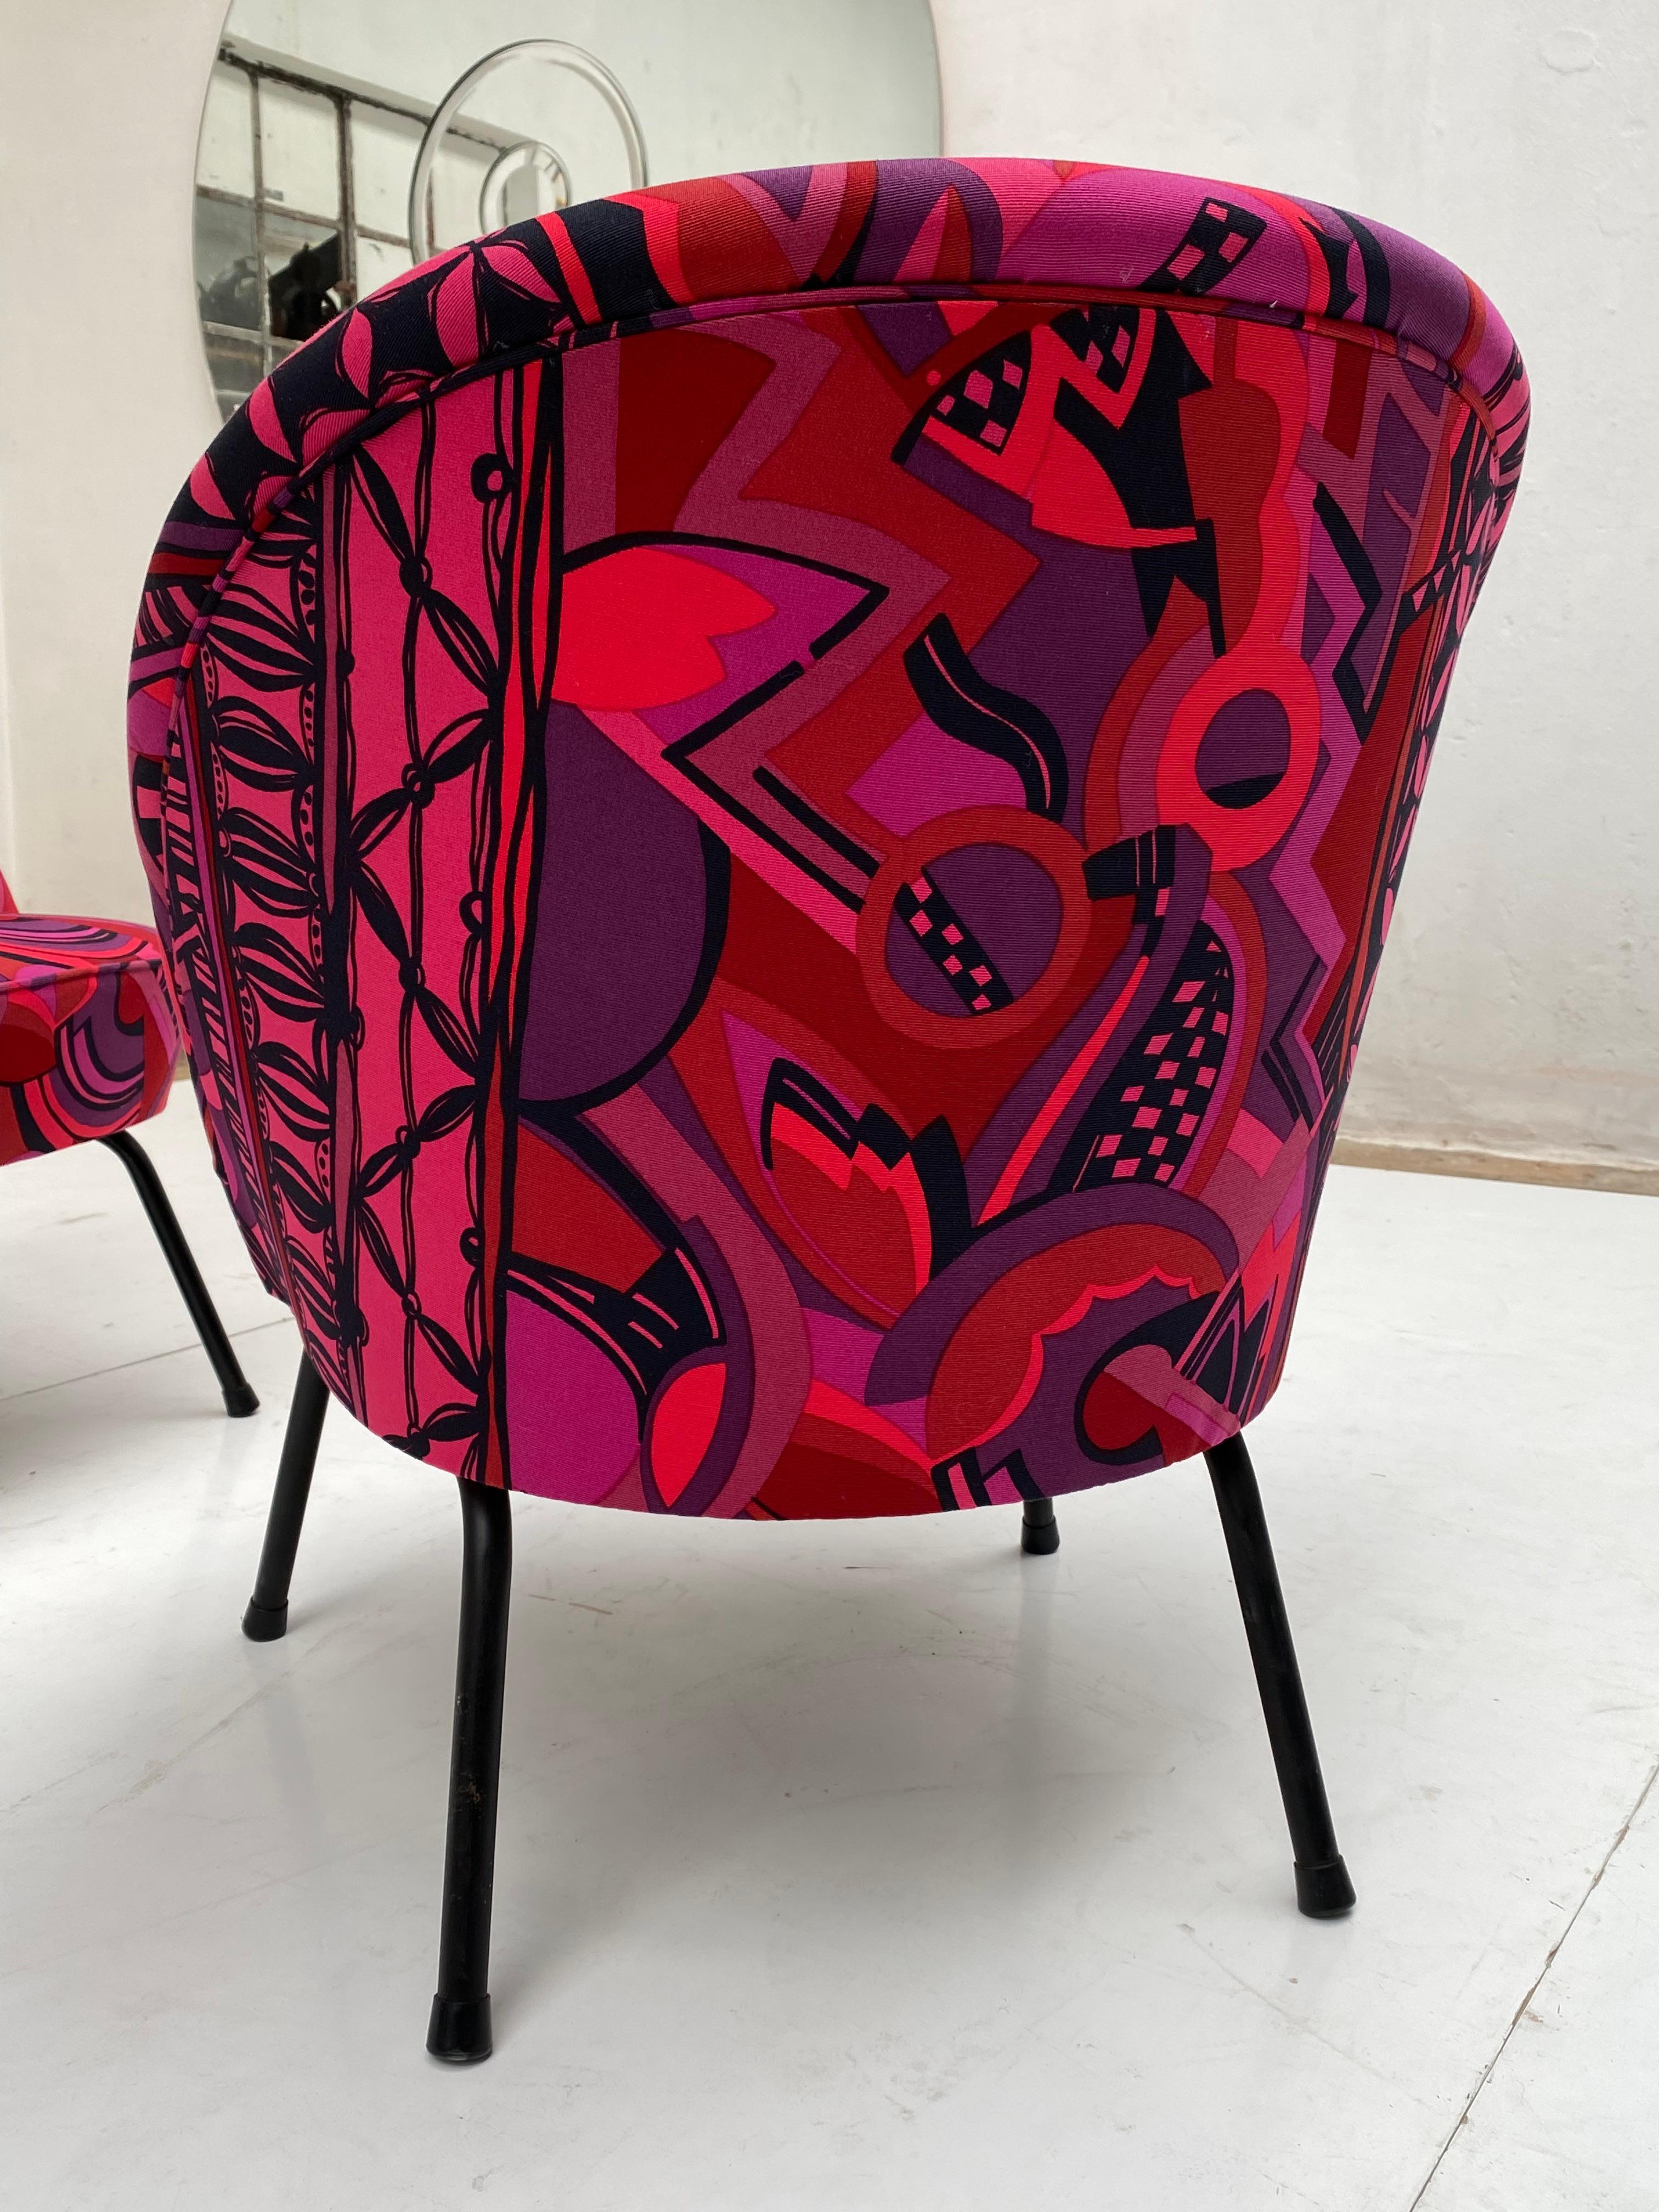 Bespoke Gianni Versace Fabric Custom Upholstered Pair of 1950's Cocktail Chairs For Sale 3